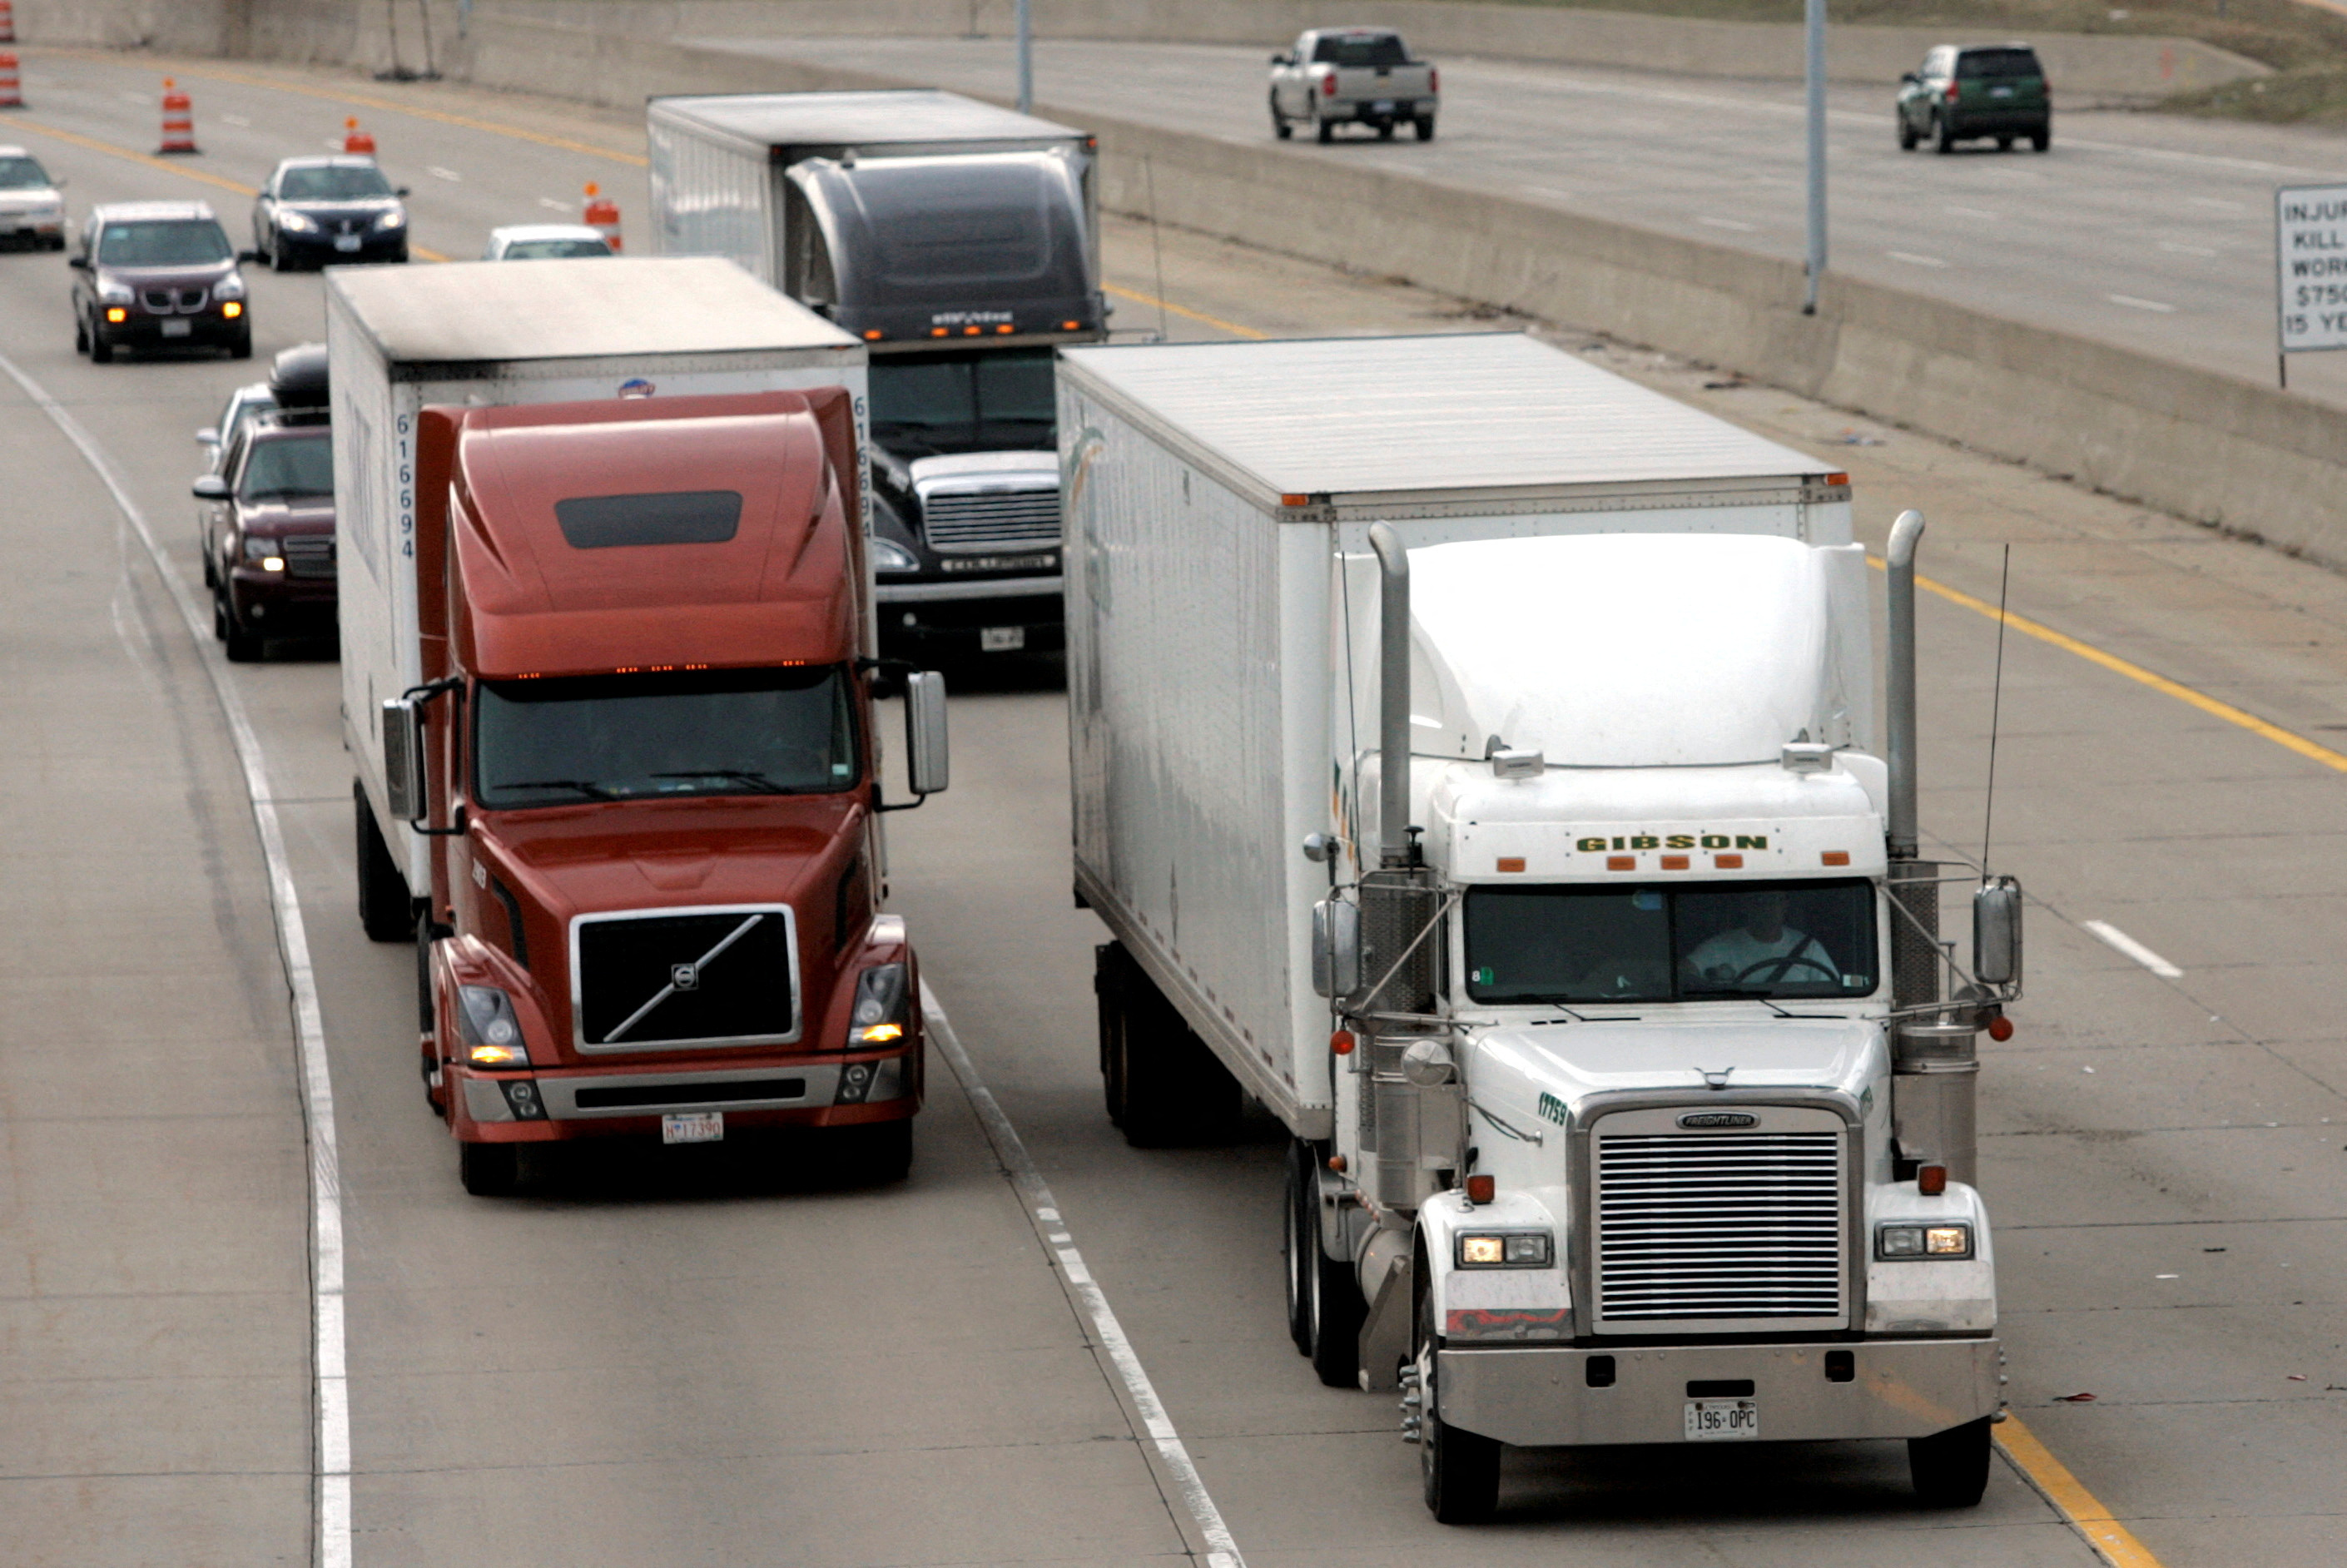 Two freight trucks are driven on a freeway in Detroit, Michigan